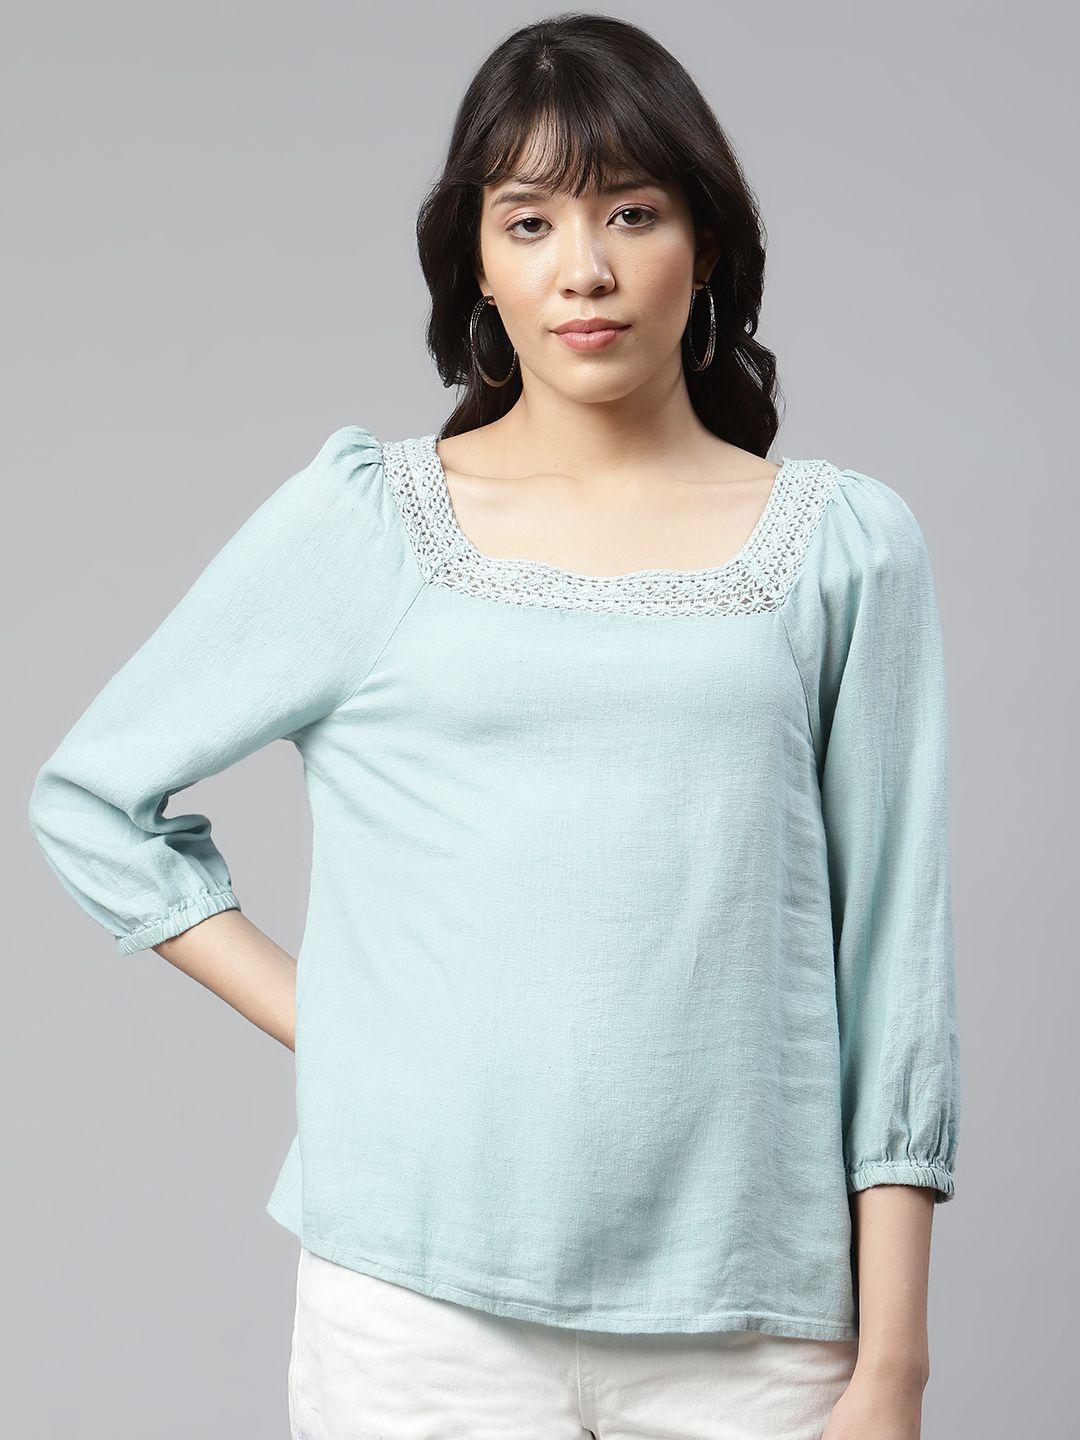 marks & spencer sea green square neck top